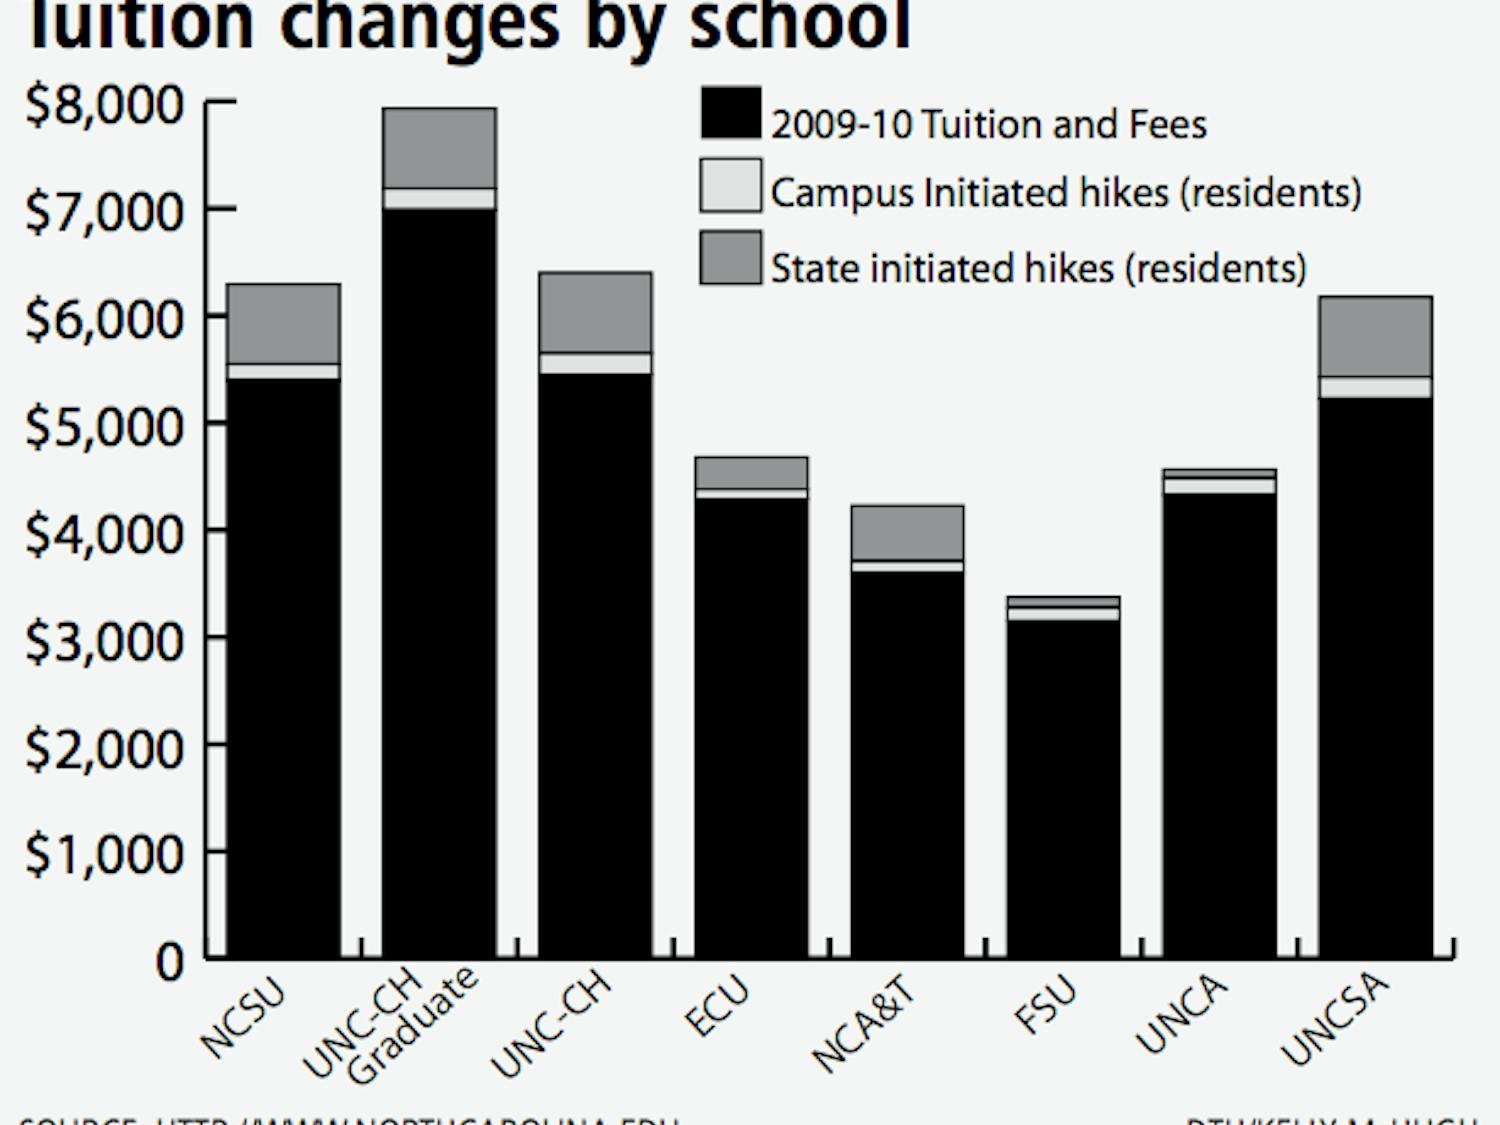 Tuition changes by school